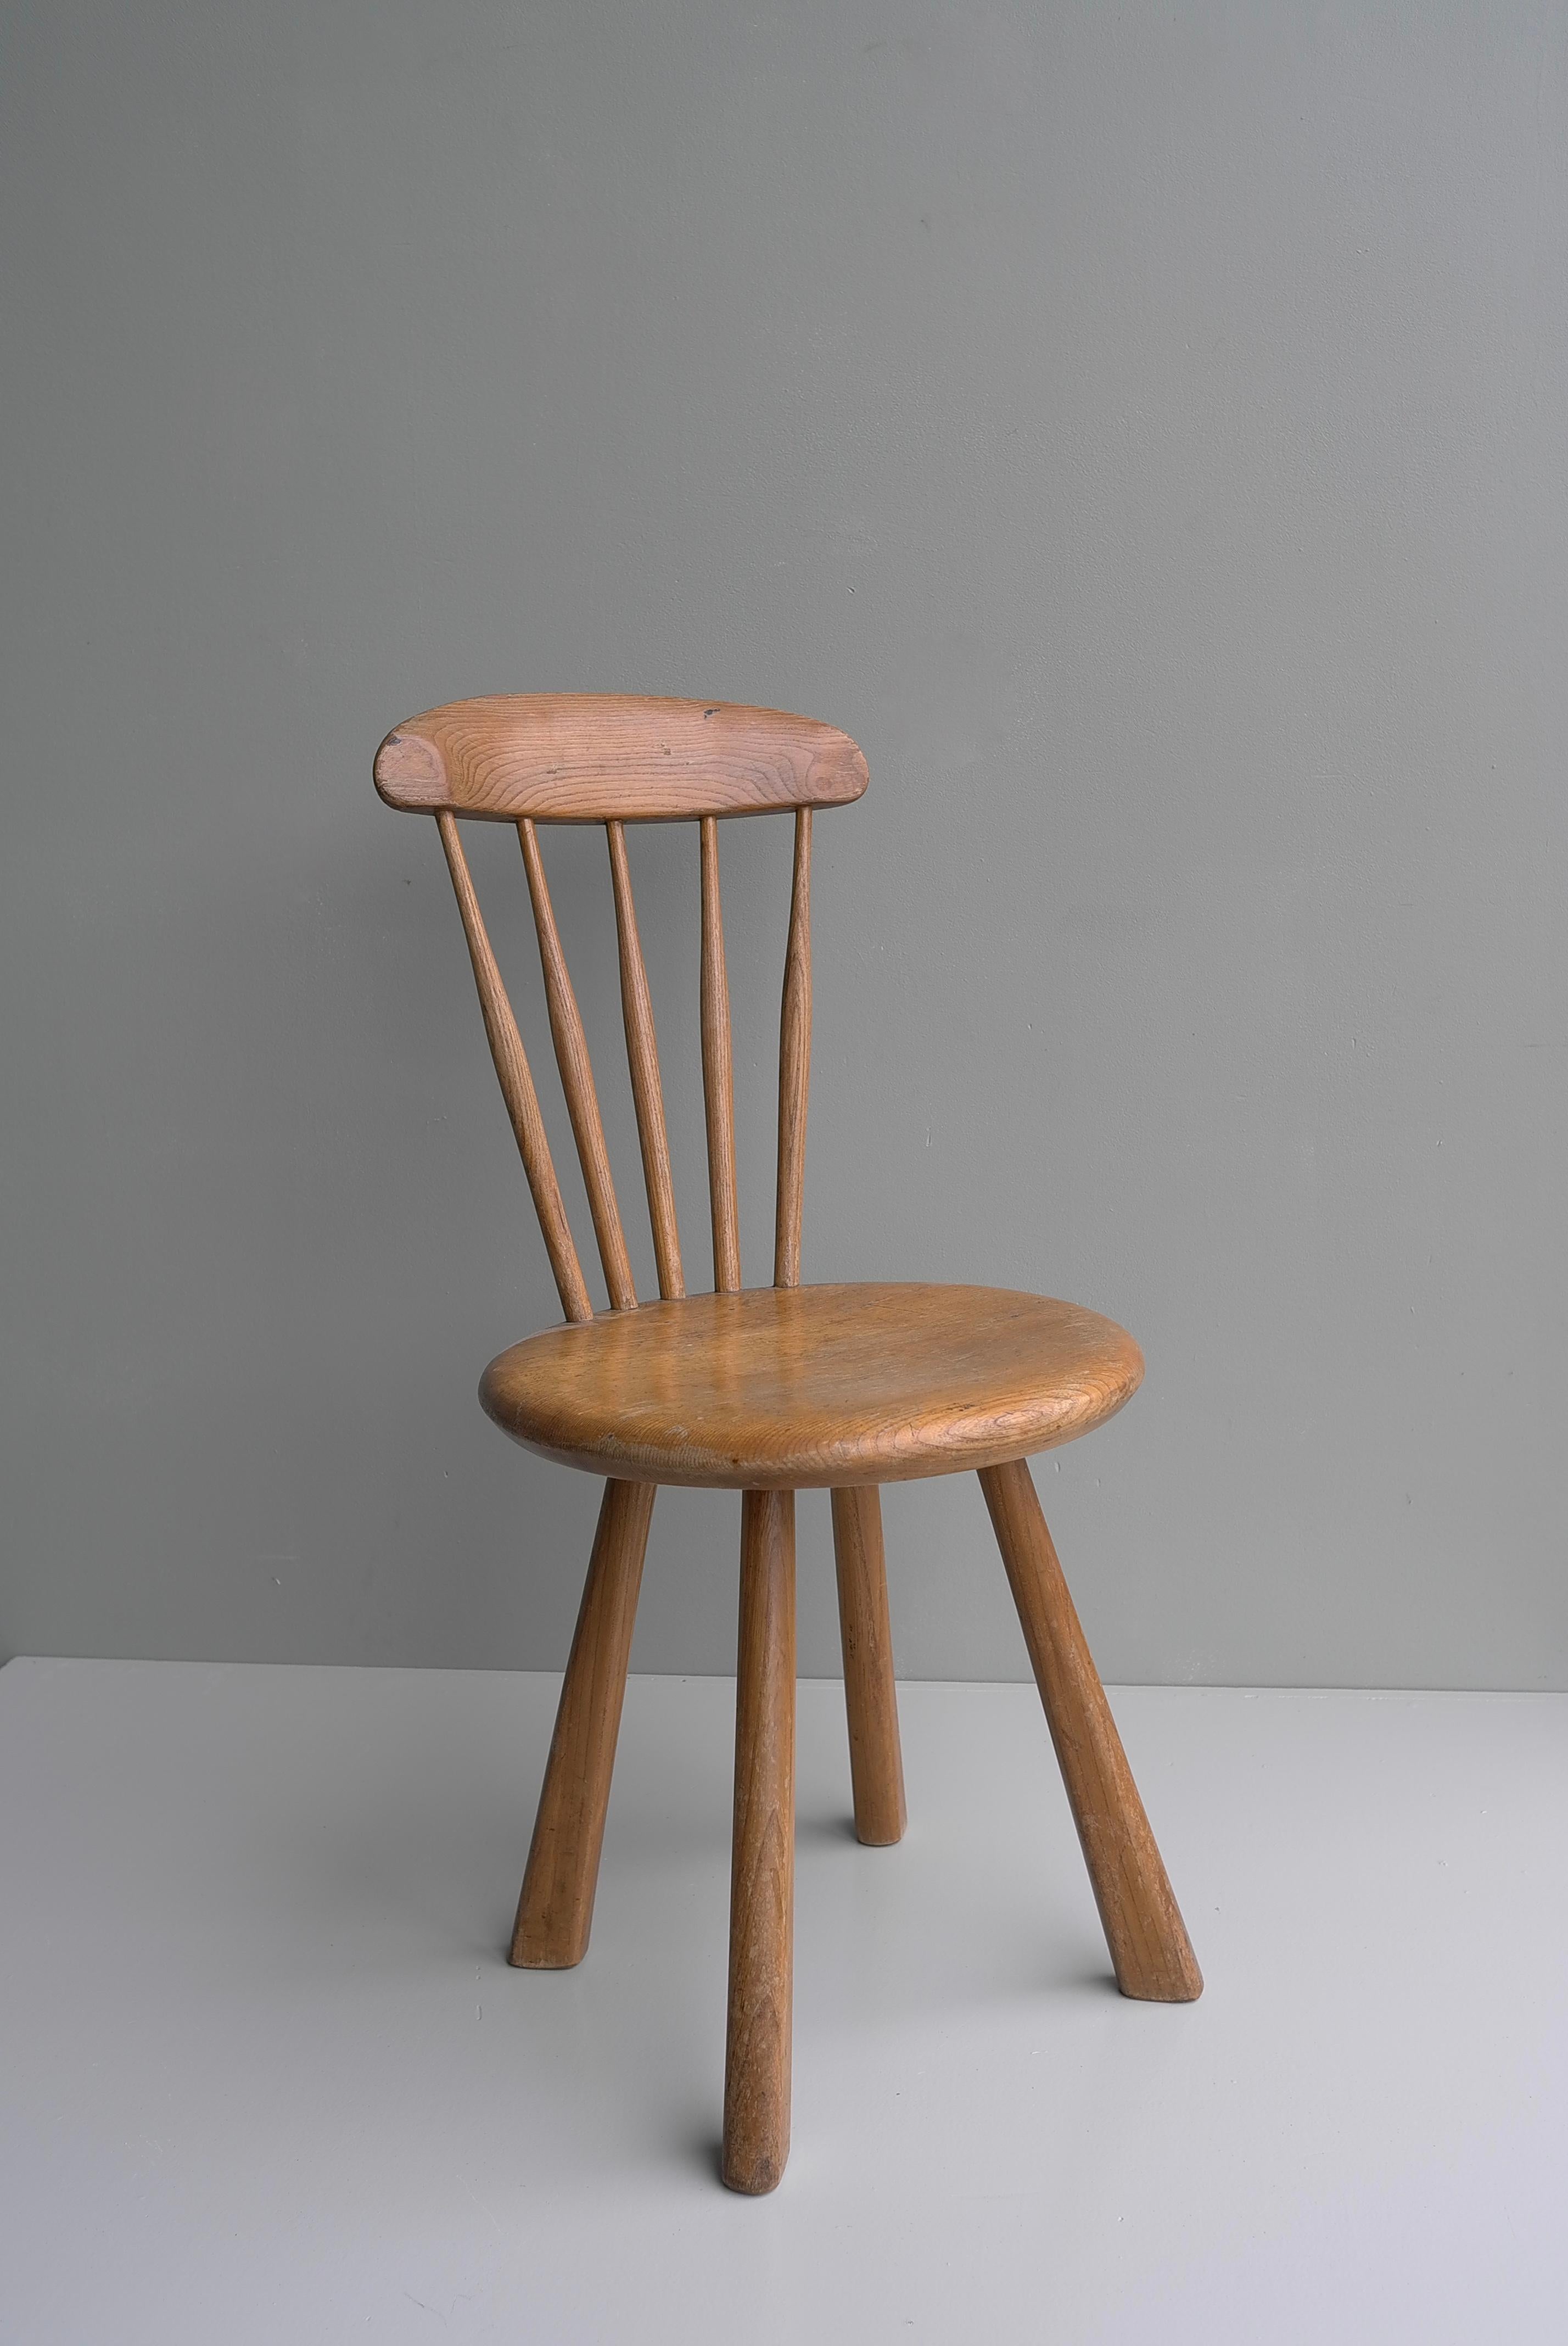 Solid elmwood side chair, France 1950's.

This stool has a beautiful structure in solid Elmwood with a warm natural patina.
There are 2 chairs  available.